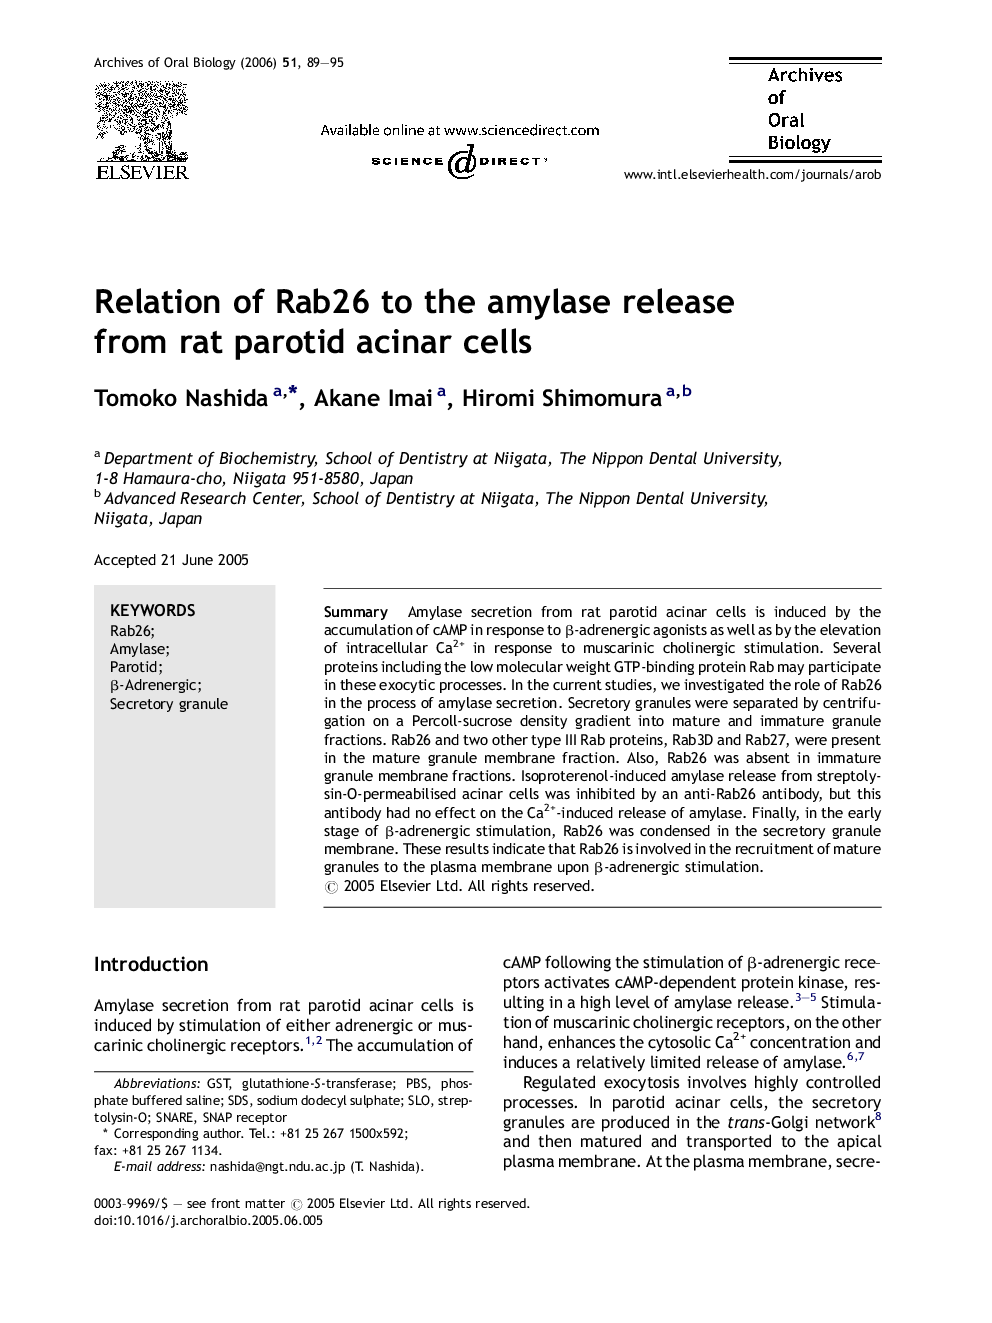 Relation of Rab26 to the amylase release from rat parotid acinar cells